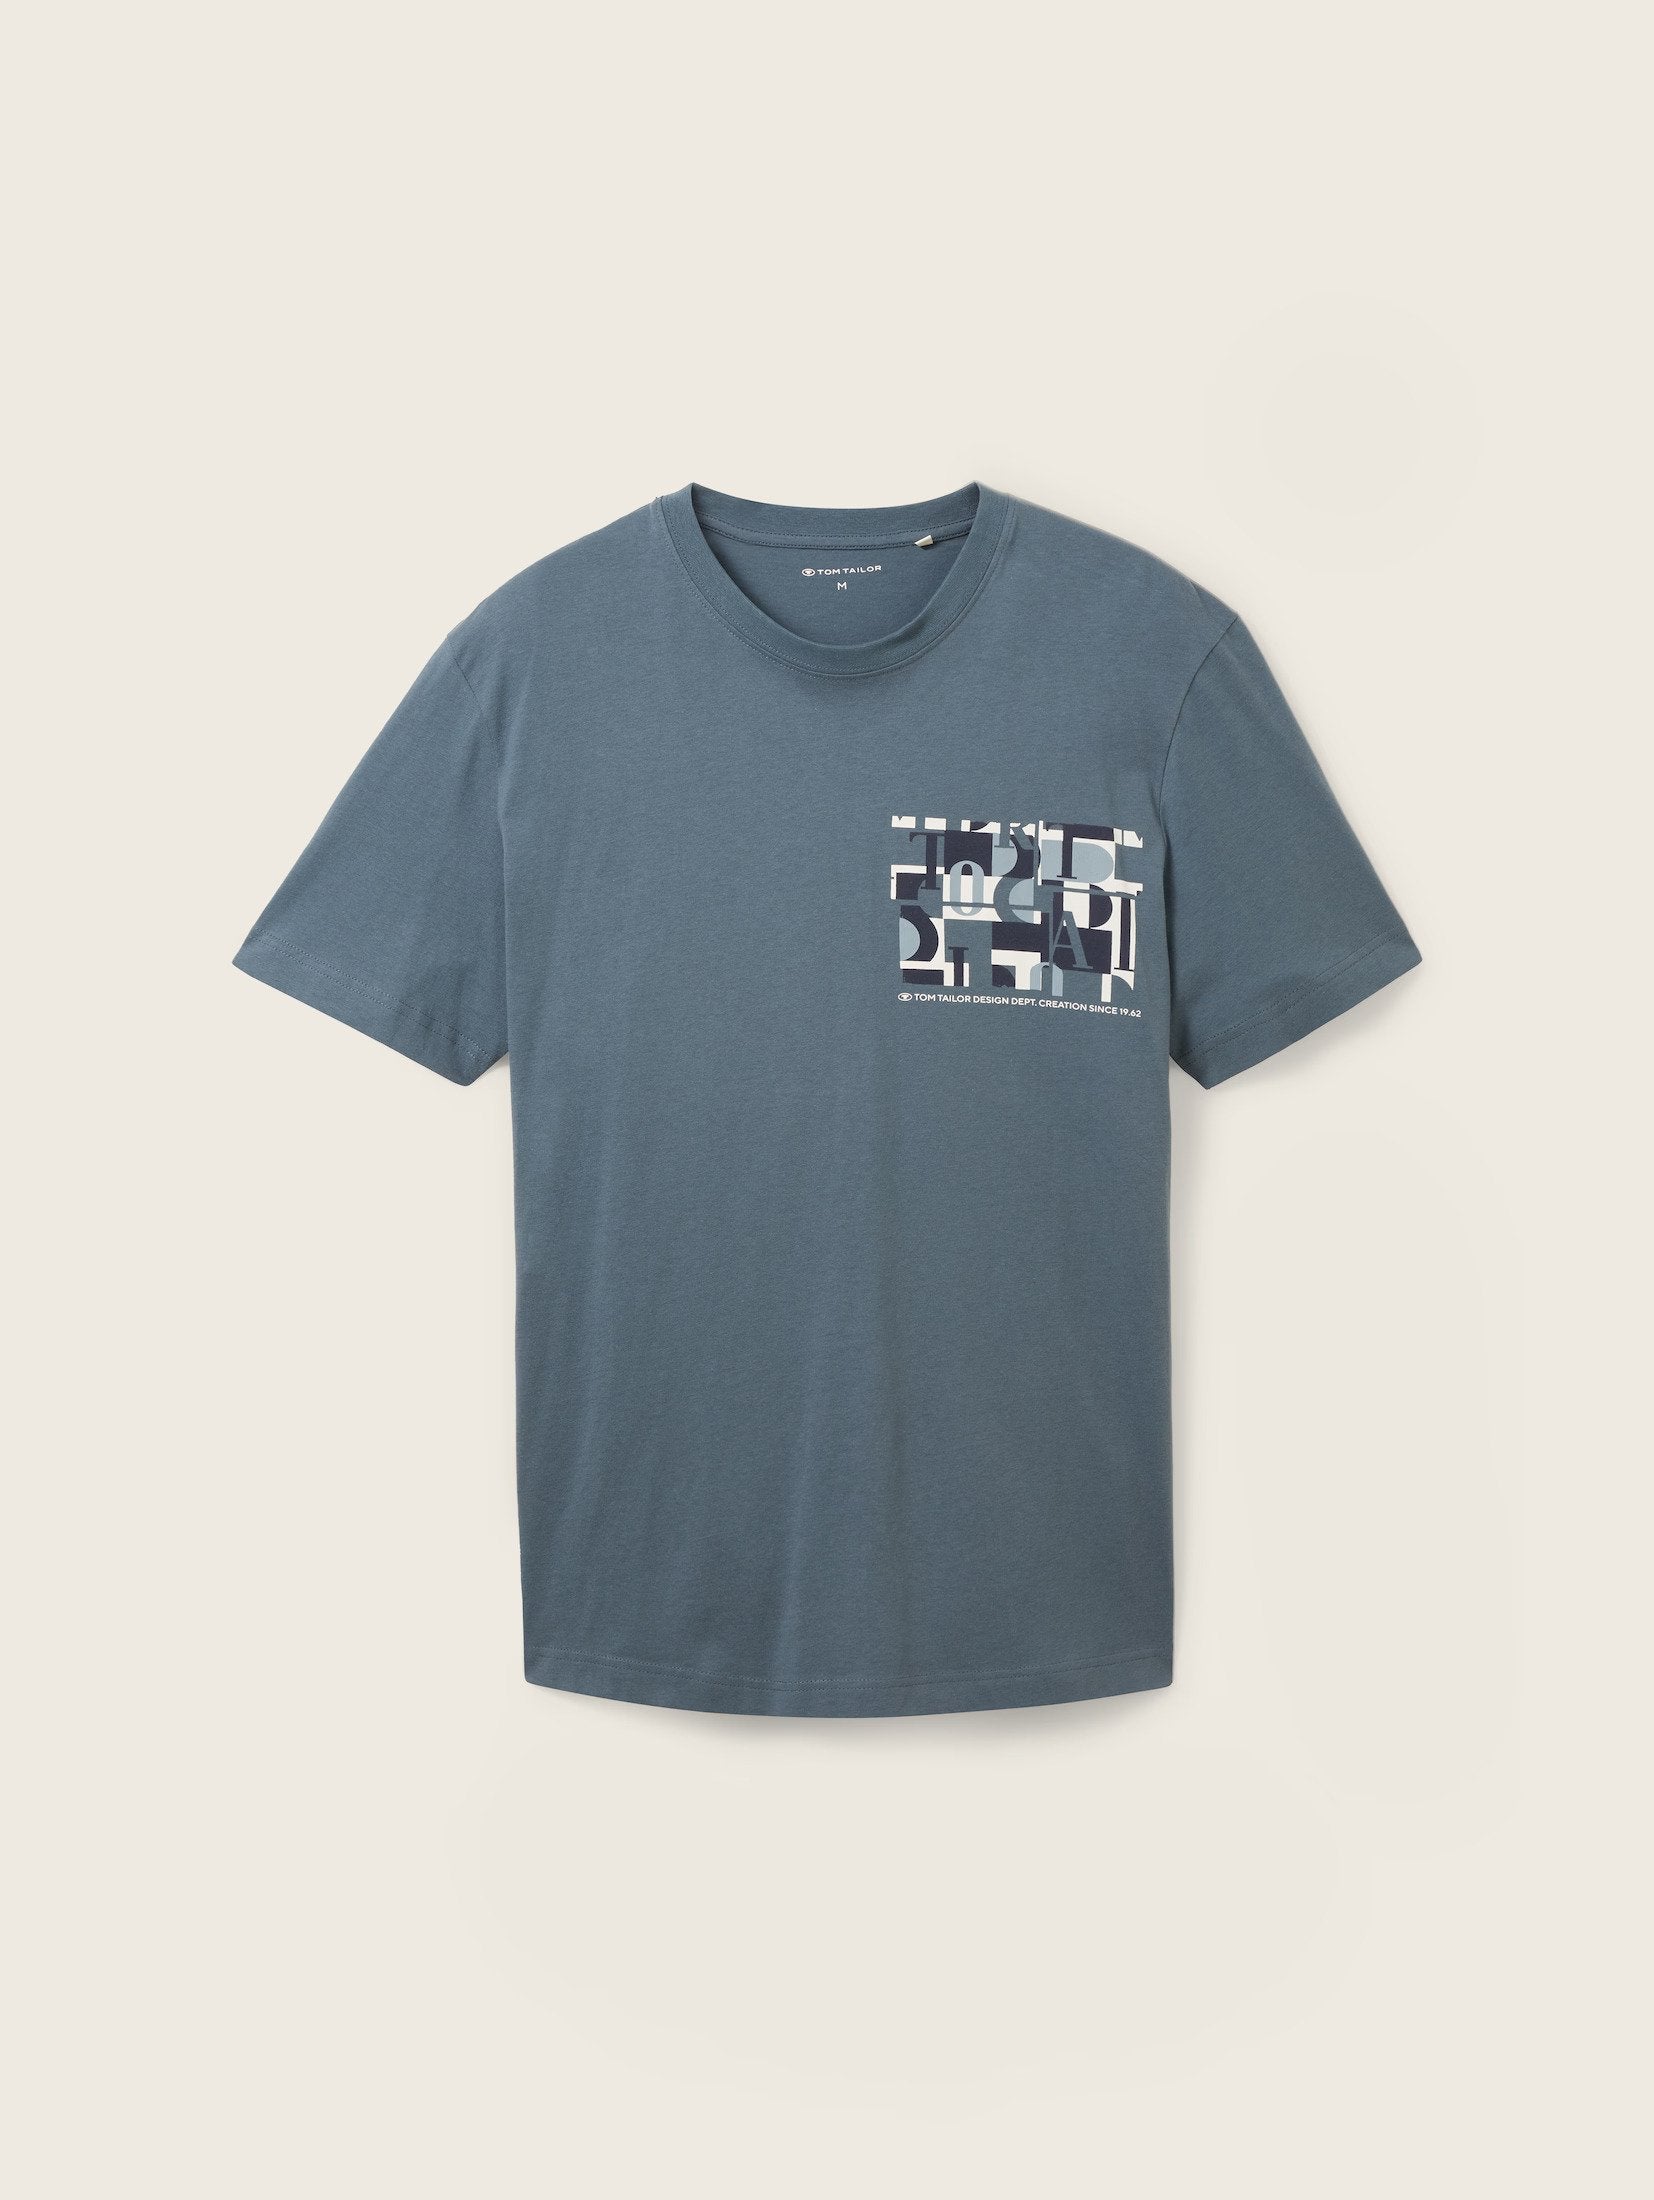 Tom Tailor Dark Blue T-Shirt with a Print